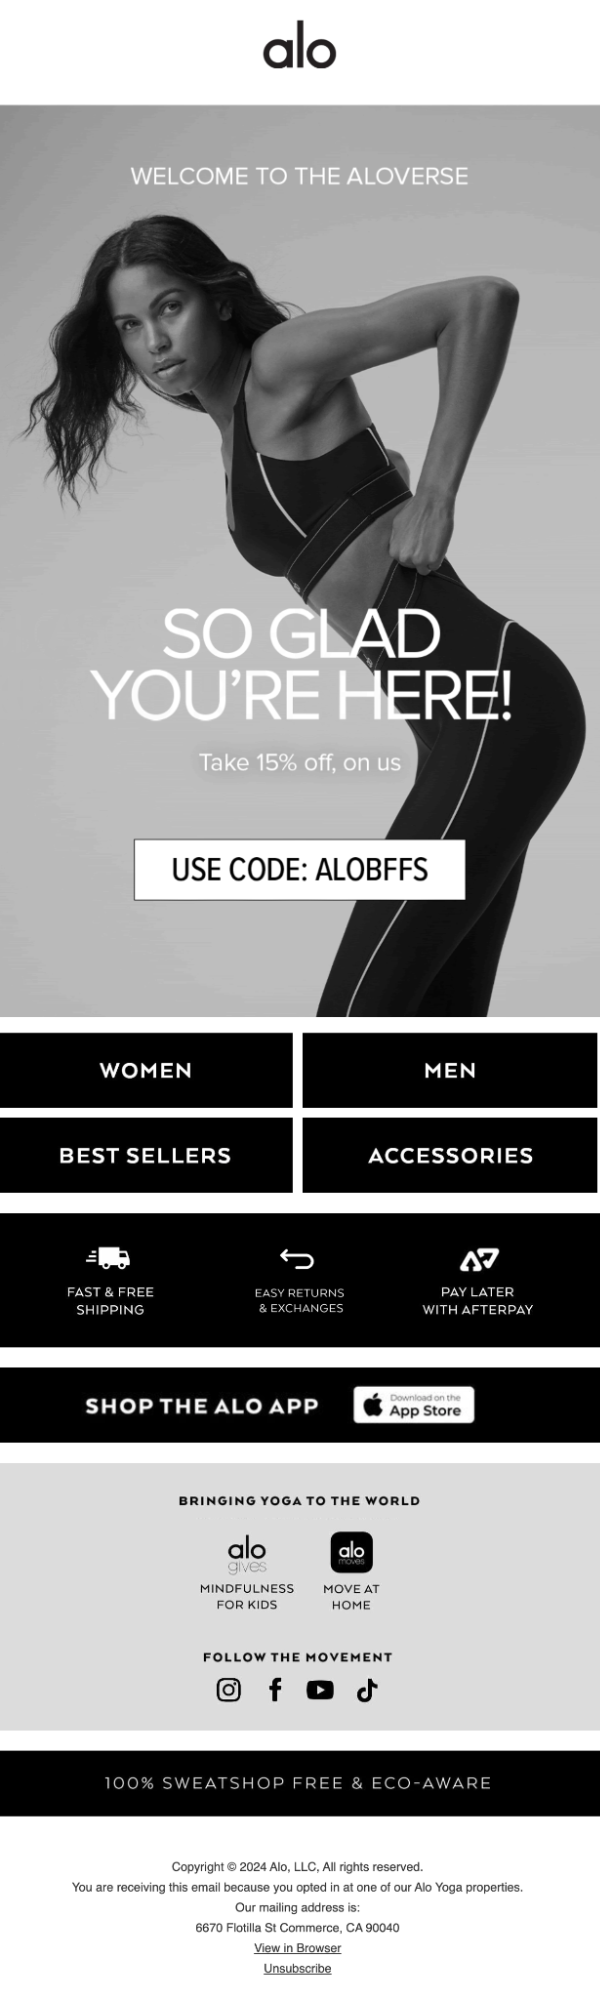 A model wearing Alo Yoga workout clothing behind a discount code inside a call-to-action button.